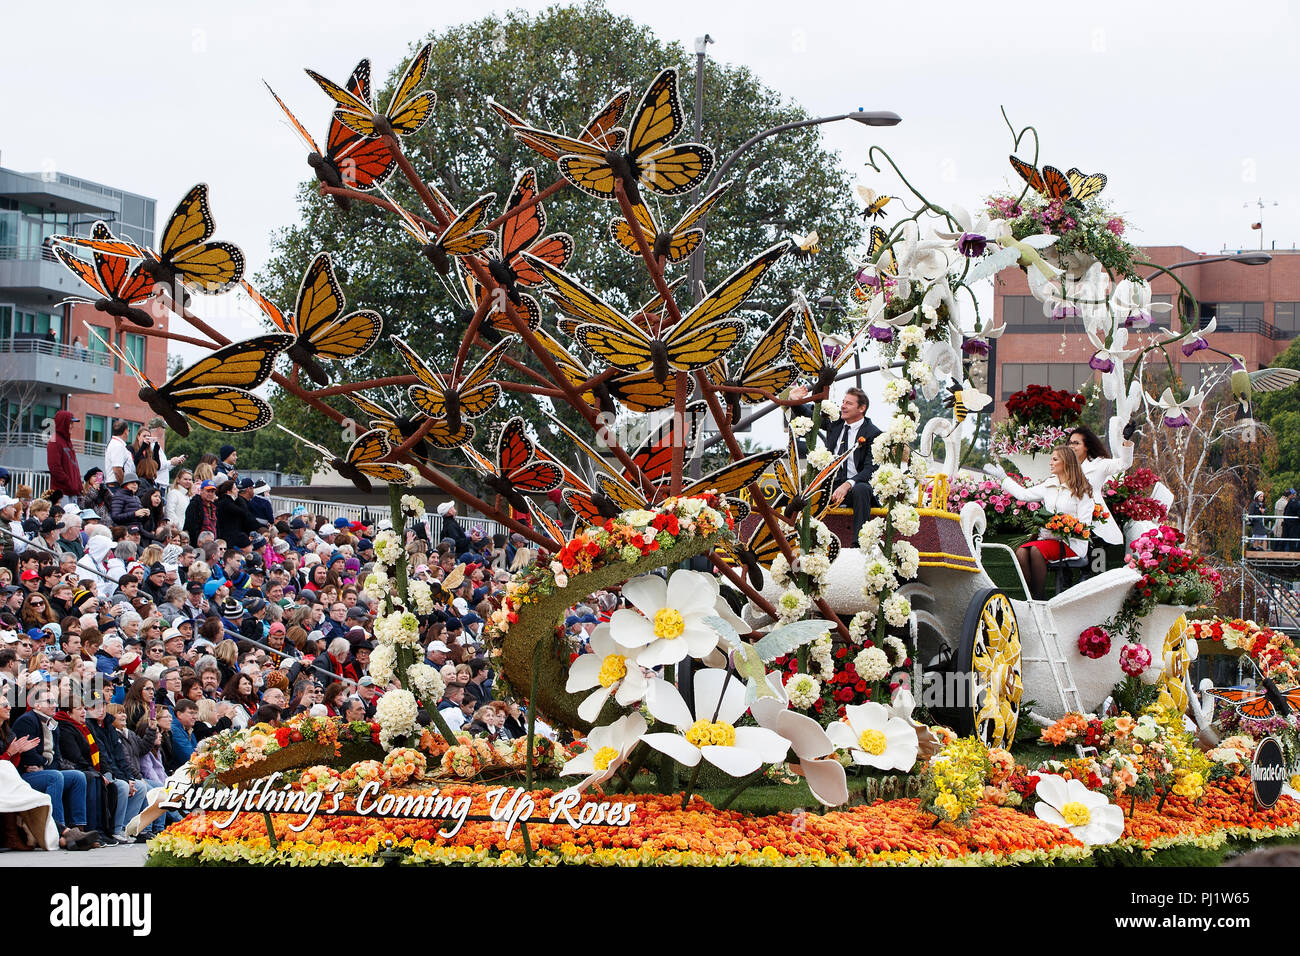 A float on the route of the 2017 Tournament of Roses Parade, Rose Parade, Pasadena, California, United States of America Stock Photo